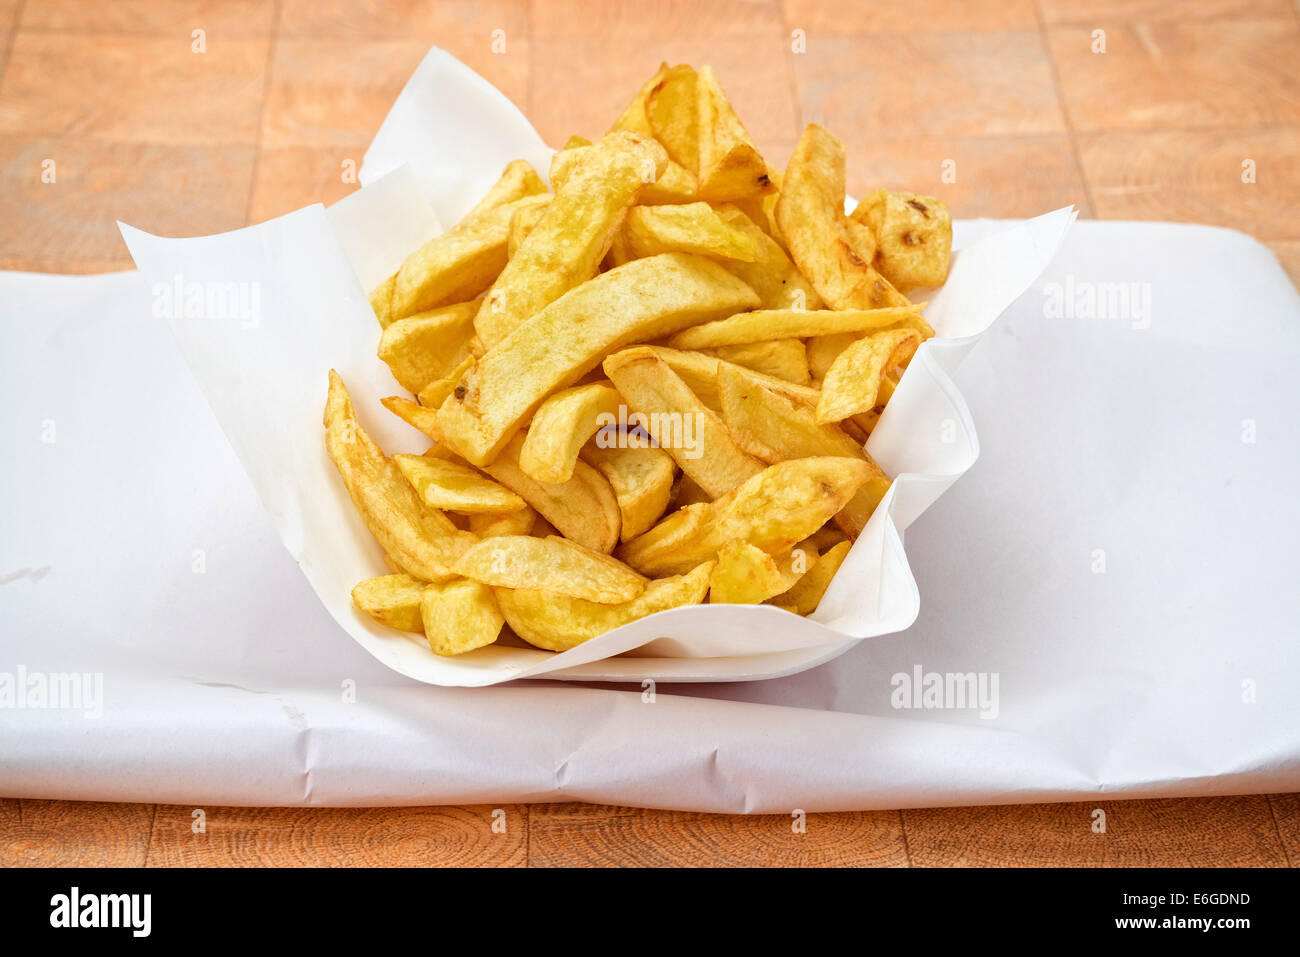 Chunky fries or chips served on a take away dish and paper Stock Photo